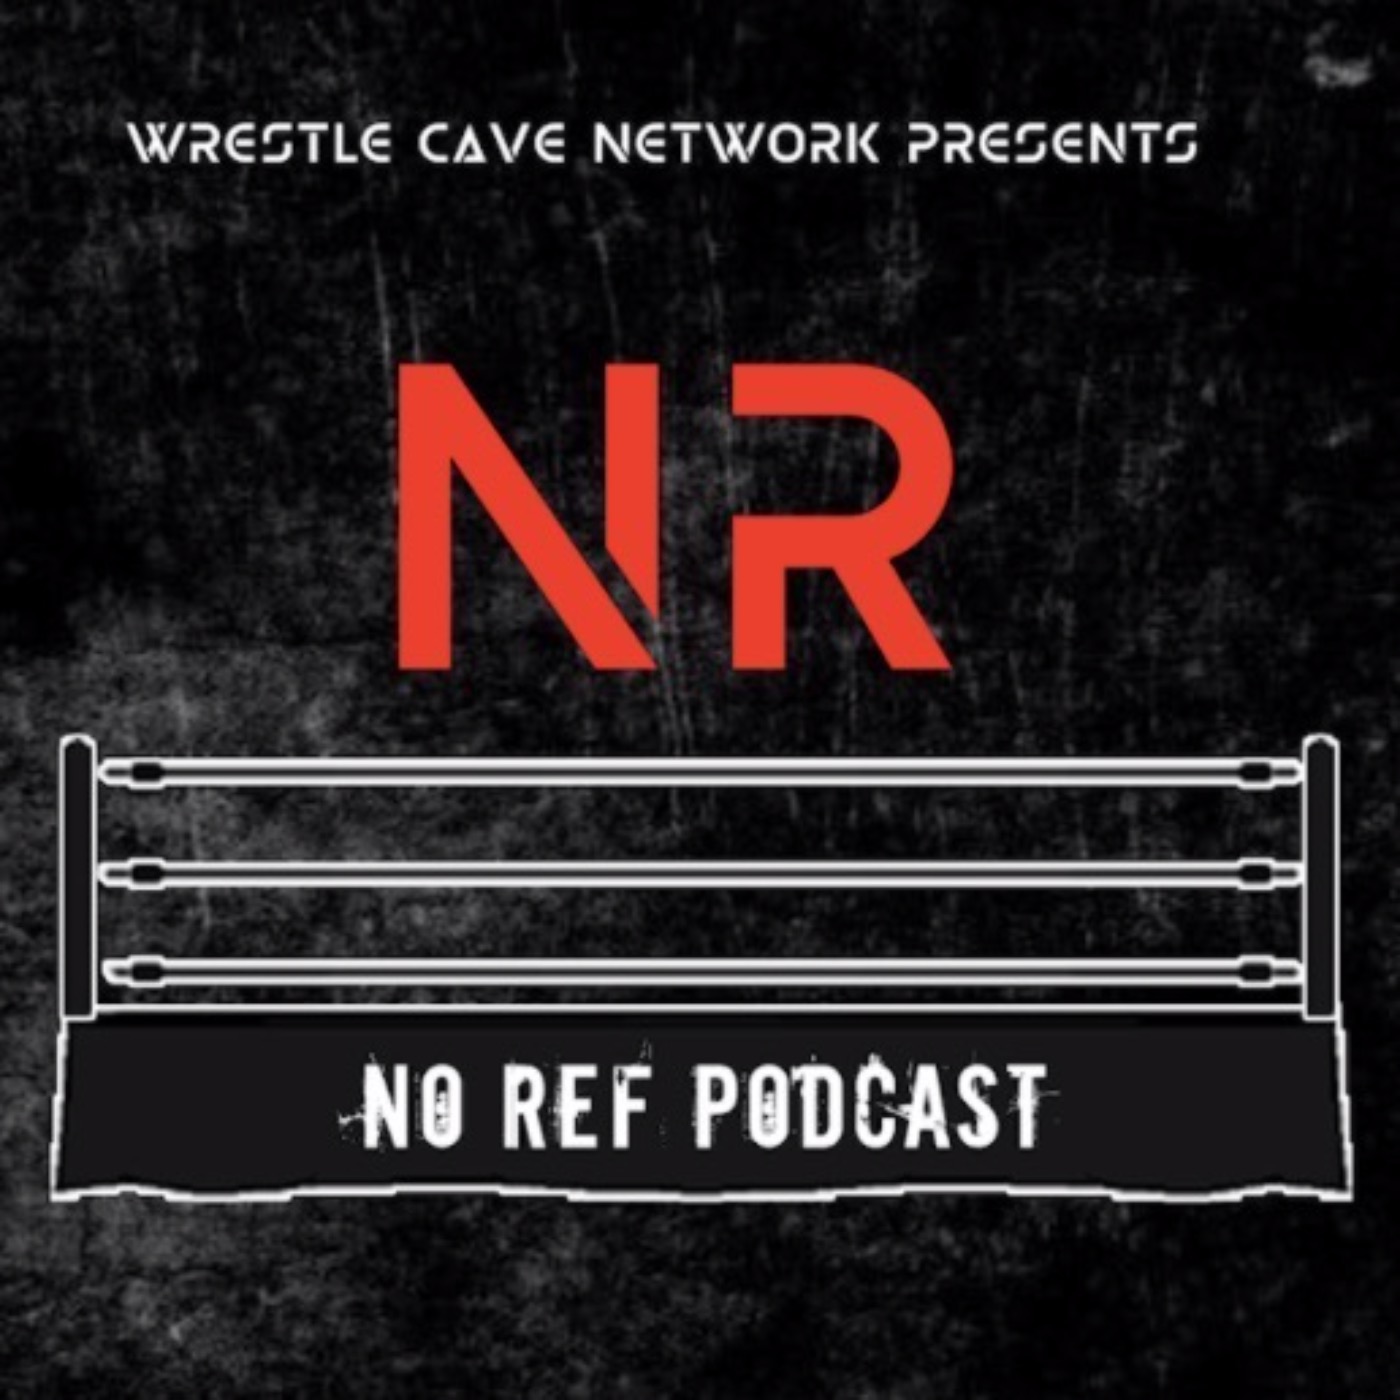 No Ref Podcast: Episode 55 "Tables, Ladders, and Dog Food"